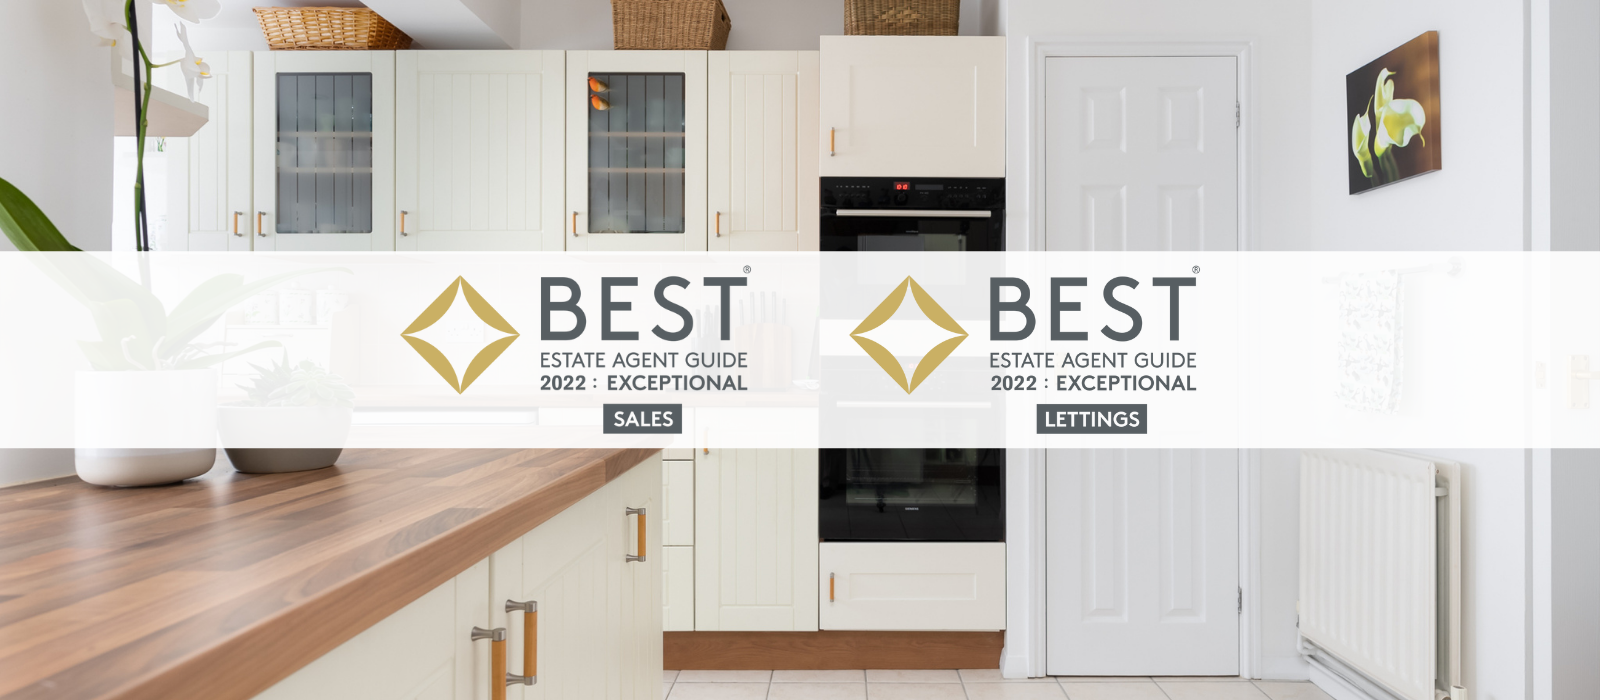 R Whitley & Co 'Exceptional' in Best Estate Agent Guide 2022